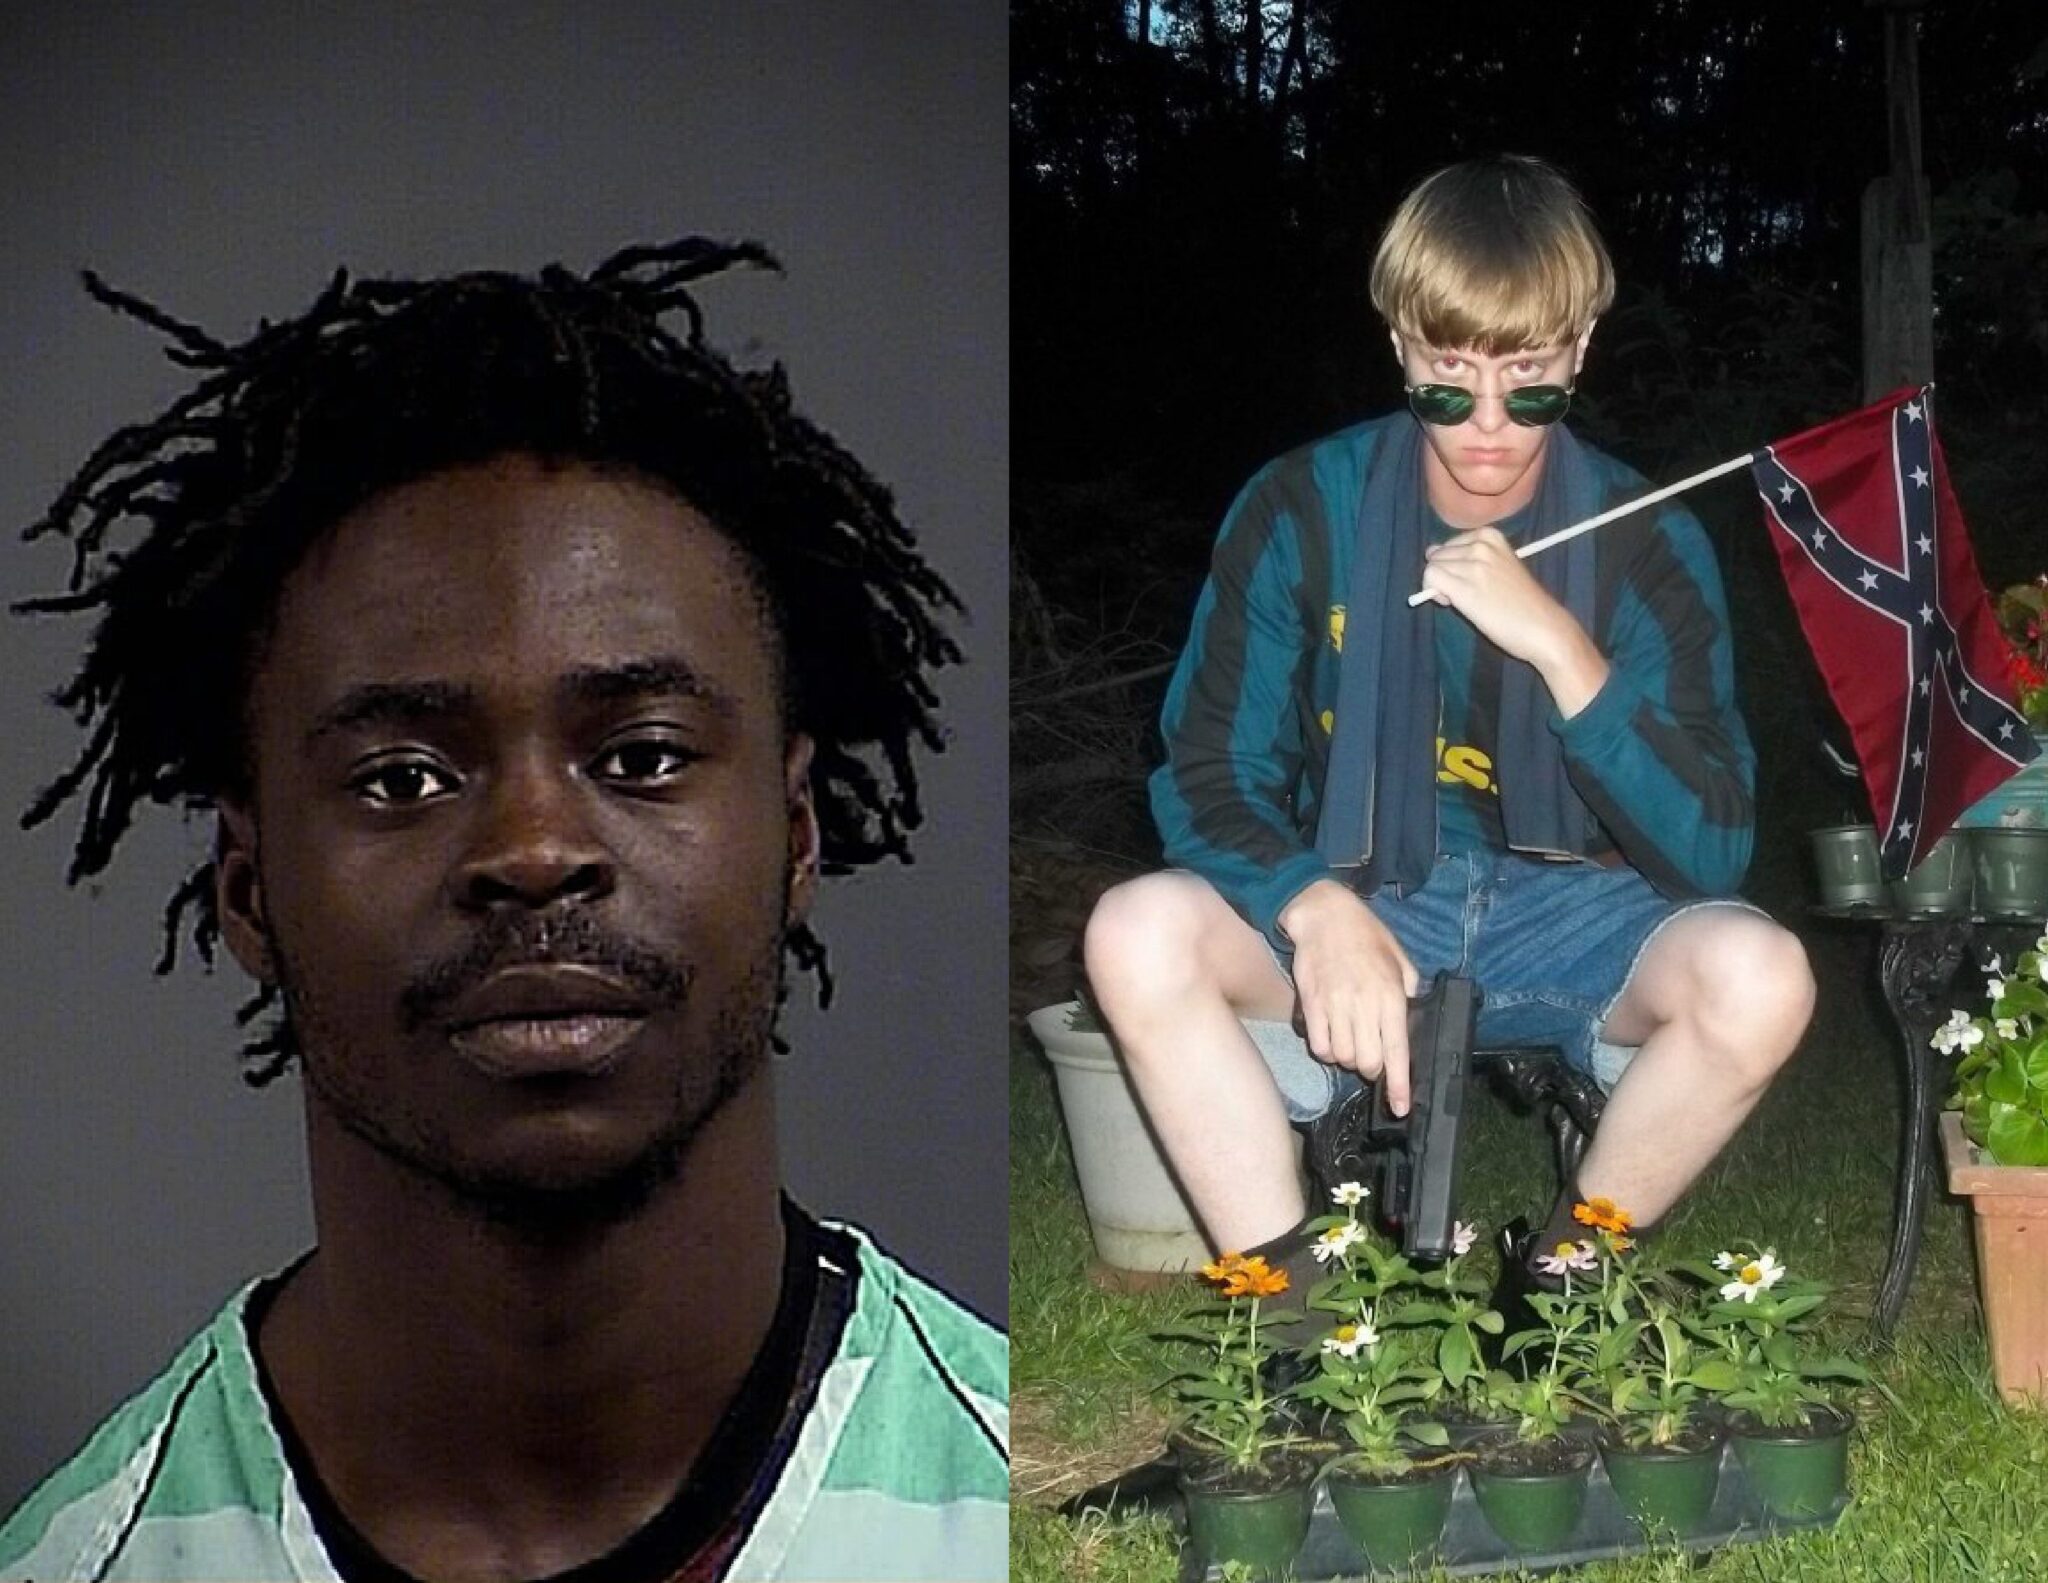 Pictured L to R: Darrius Stafford and Dylann Roof